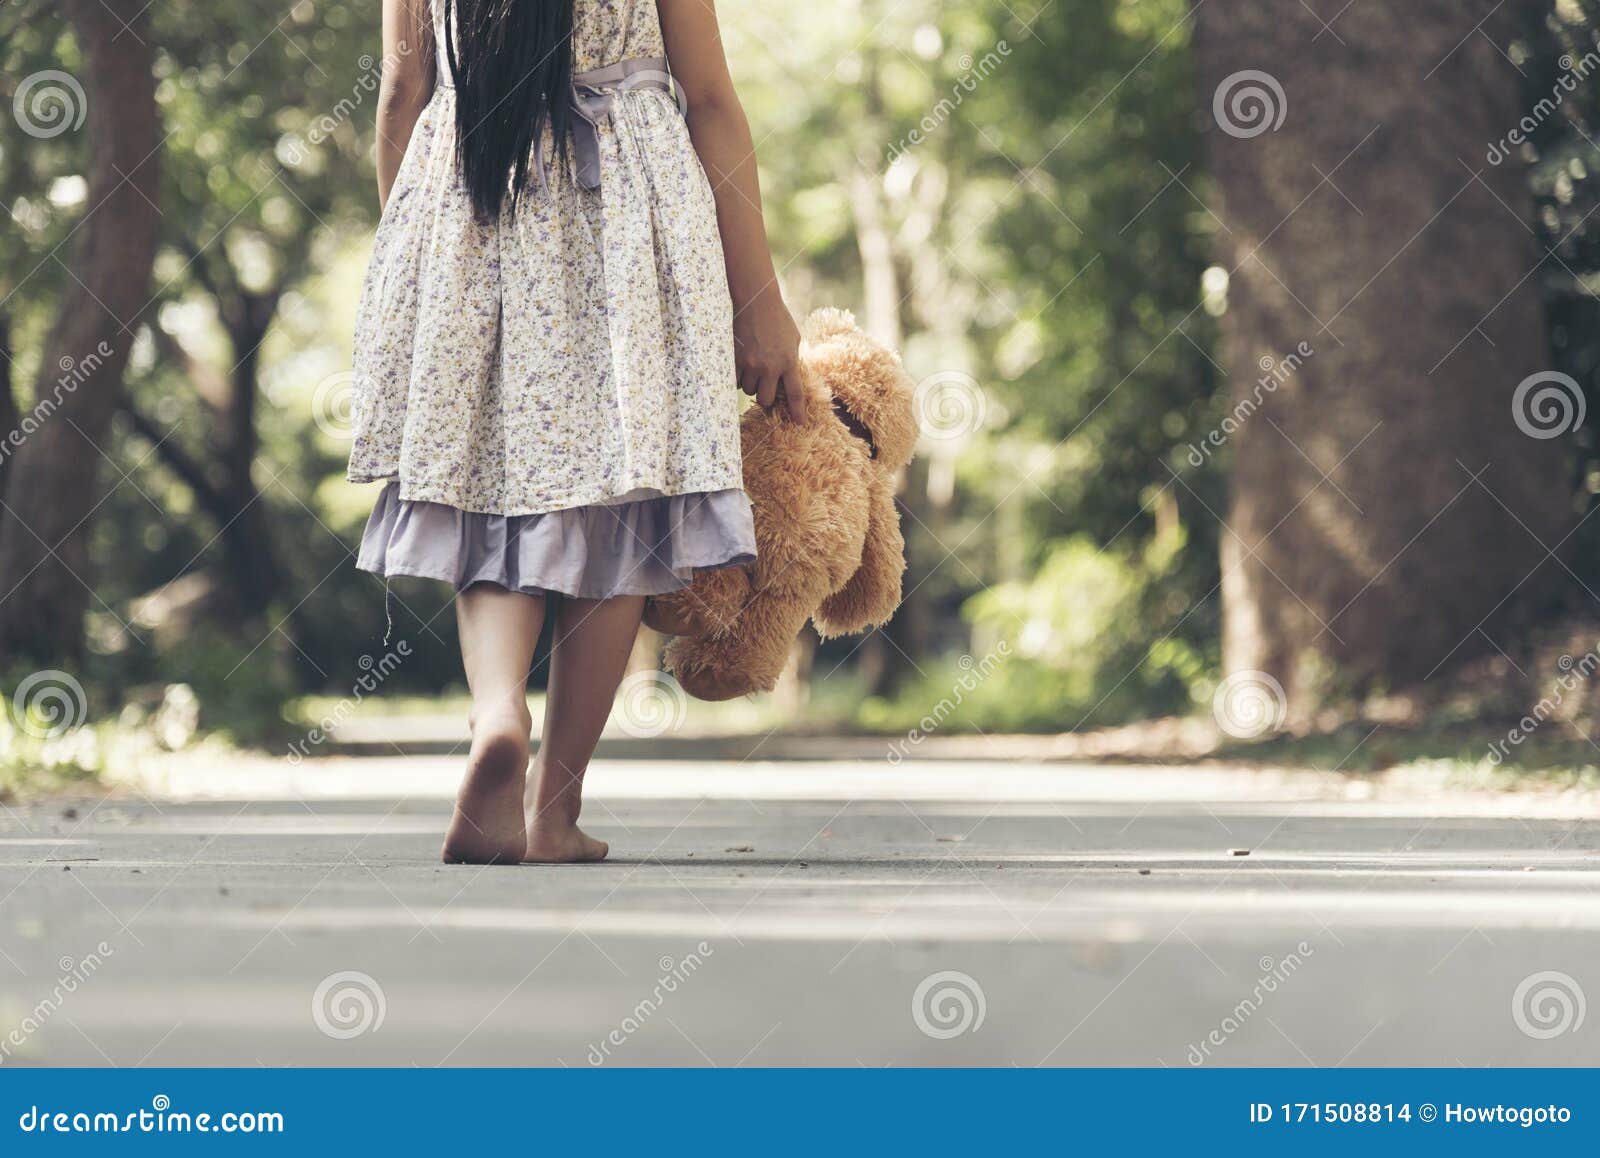 Sad Girl Feeling Alone in the Park. Lonely Concepts Stock Photo ...